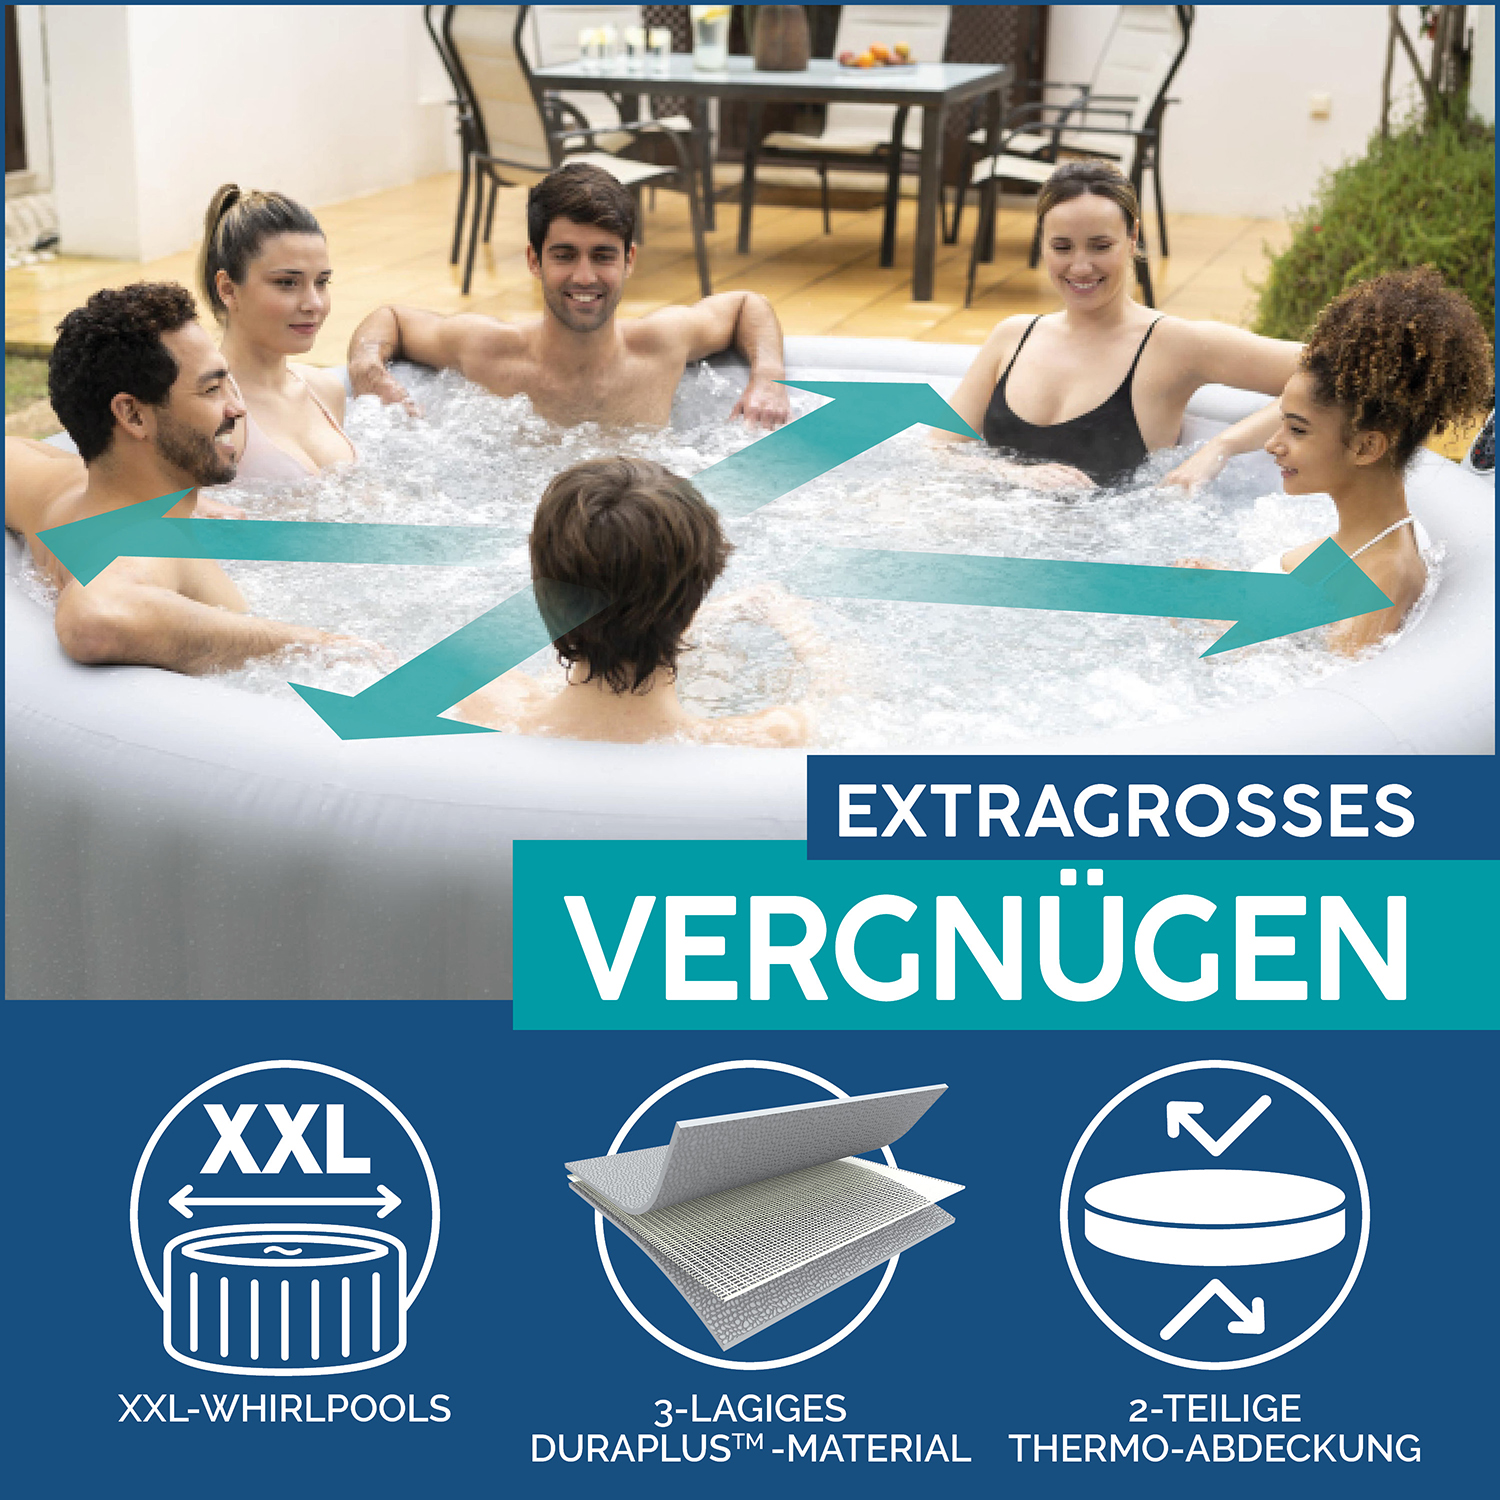 Whirlpools LAY-Z-SPA® Whirlpool x71 Alle rund Whirlpools | cm, Grenada & Zubehör Whirlpools Lay-Z-Spa | | Ø 236 AirJet™